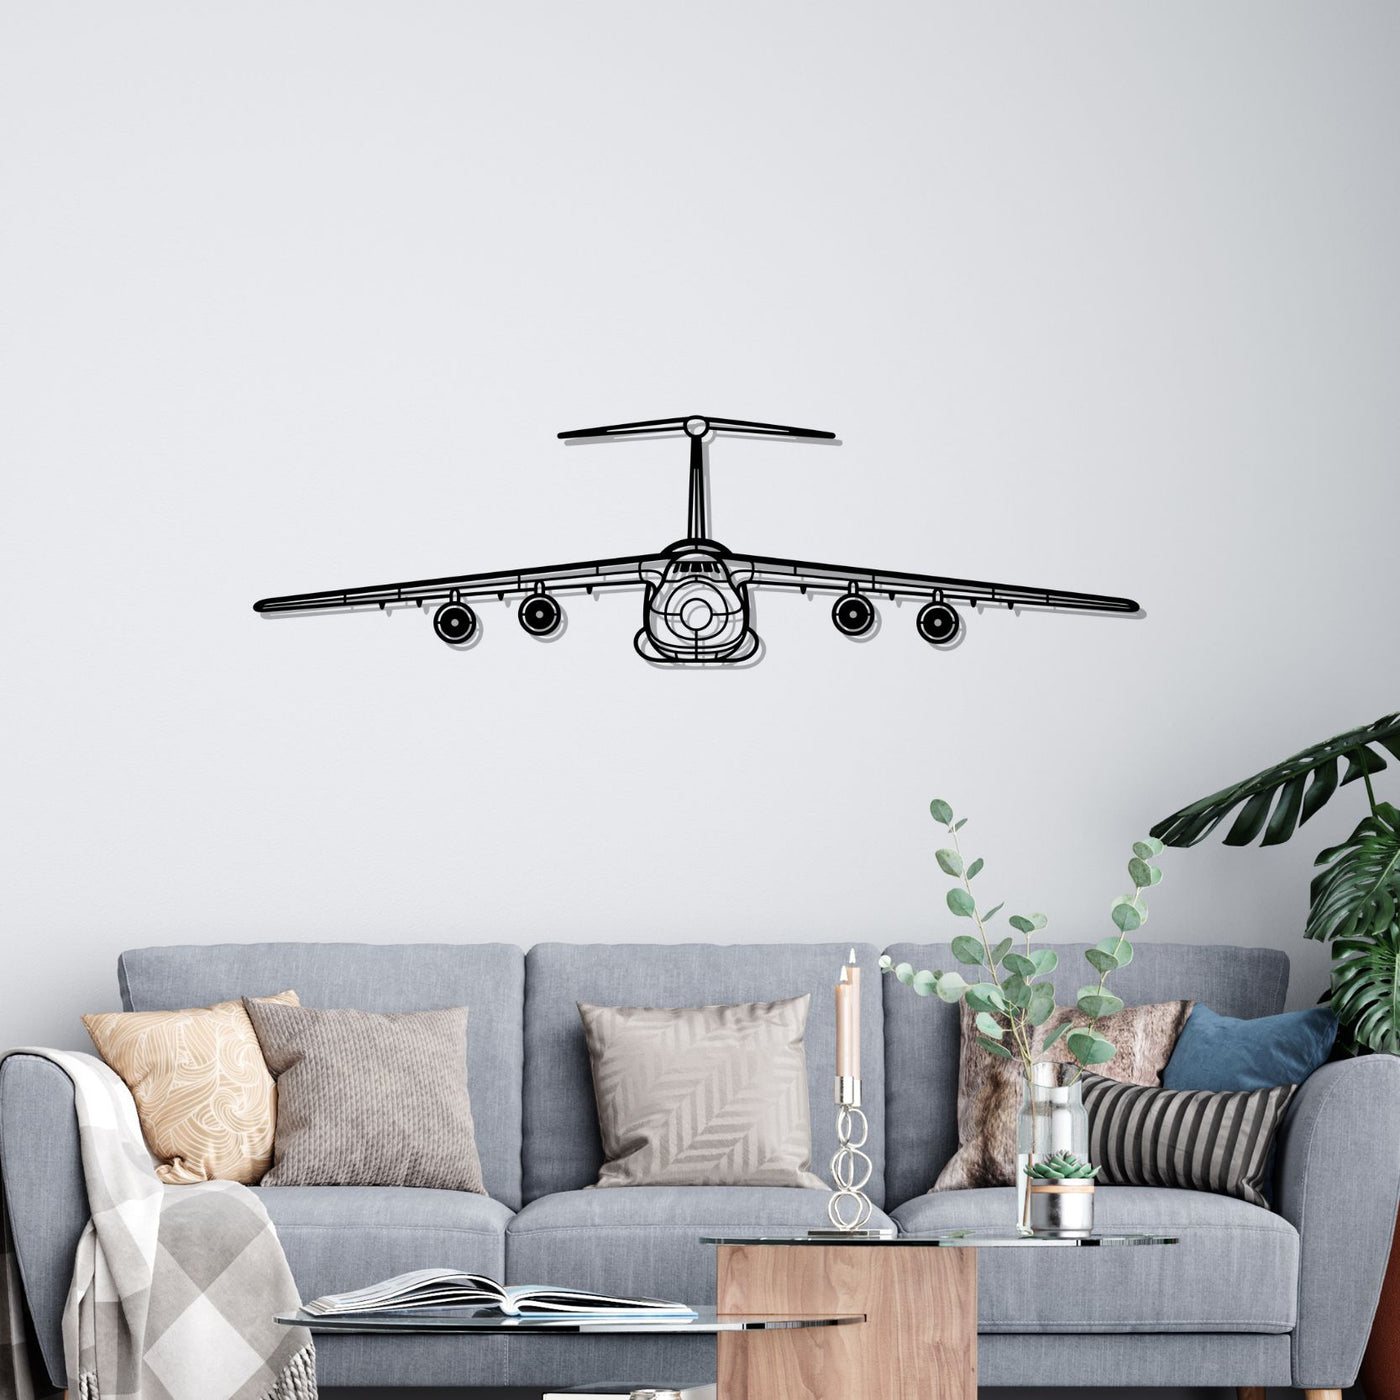 C-5 Galaxy Front Silhouette Metal Wall Art